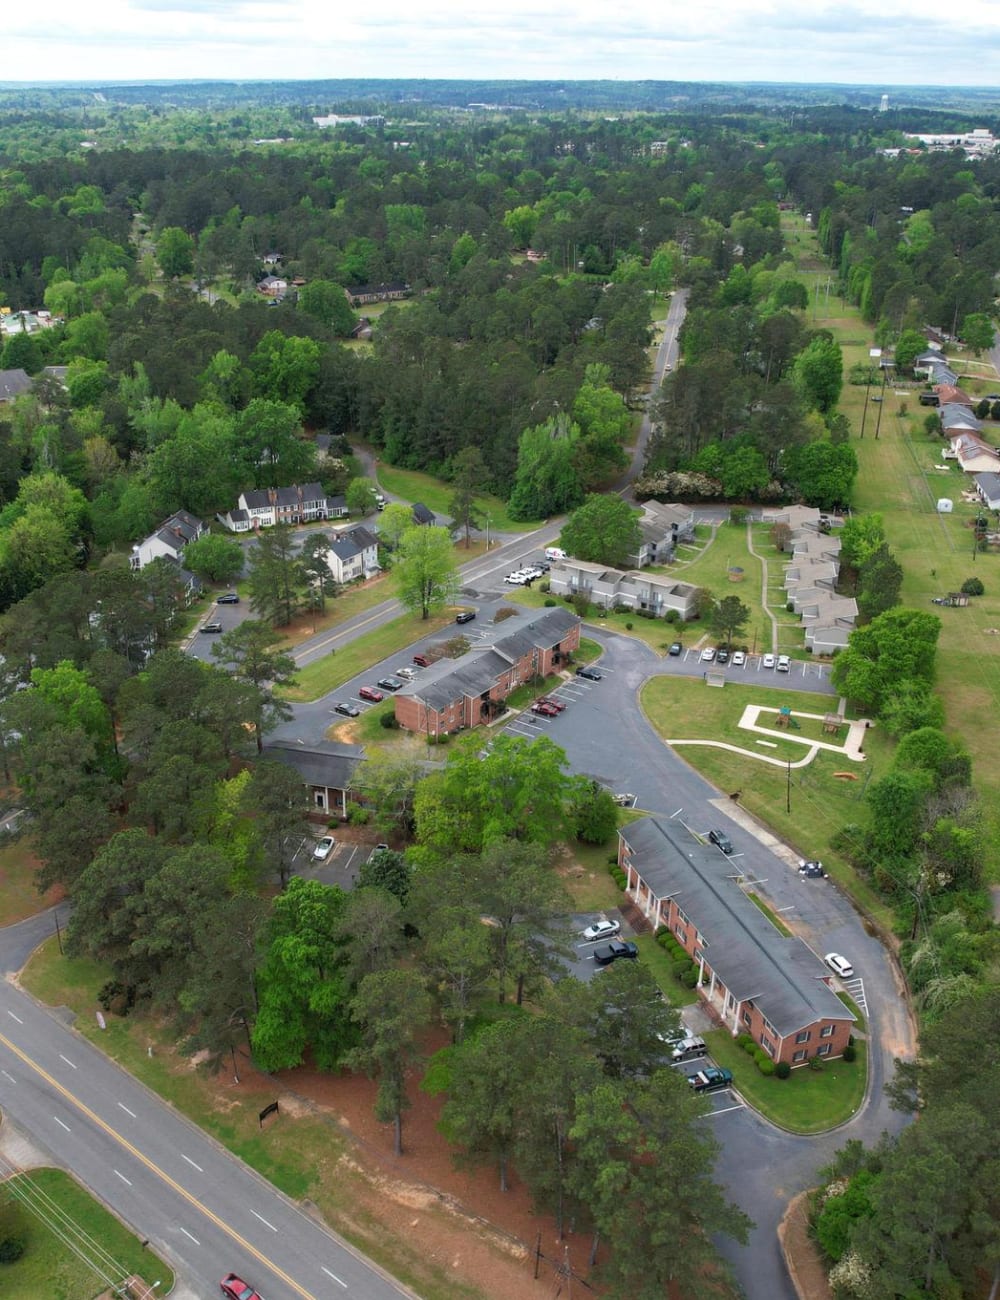 An aerial view of the community at Briarcliff Apartment Homes in Milledgeville, Georgia